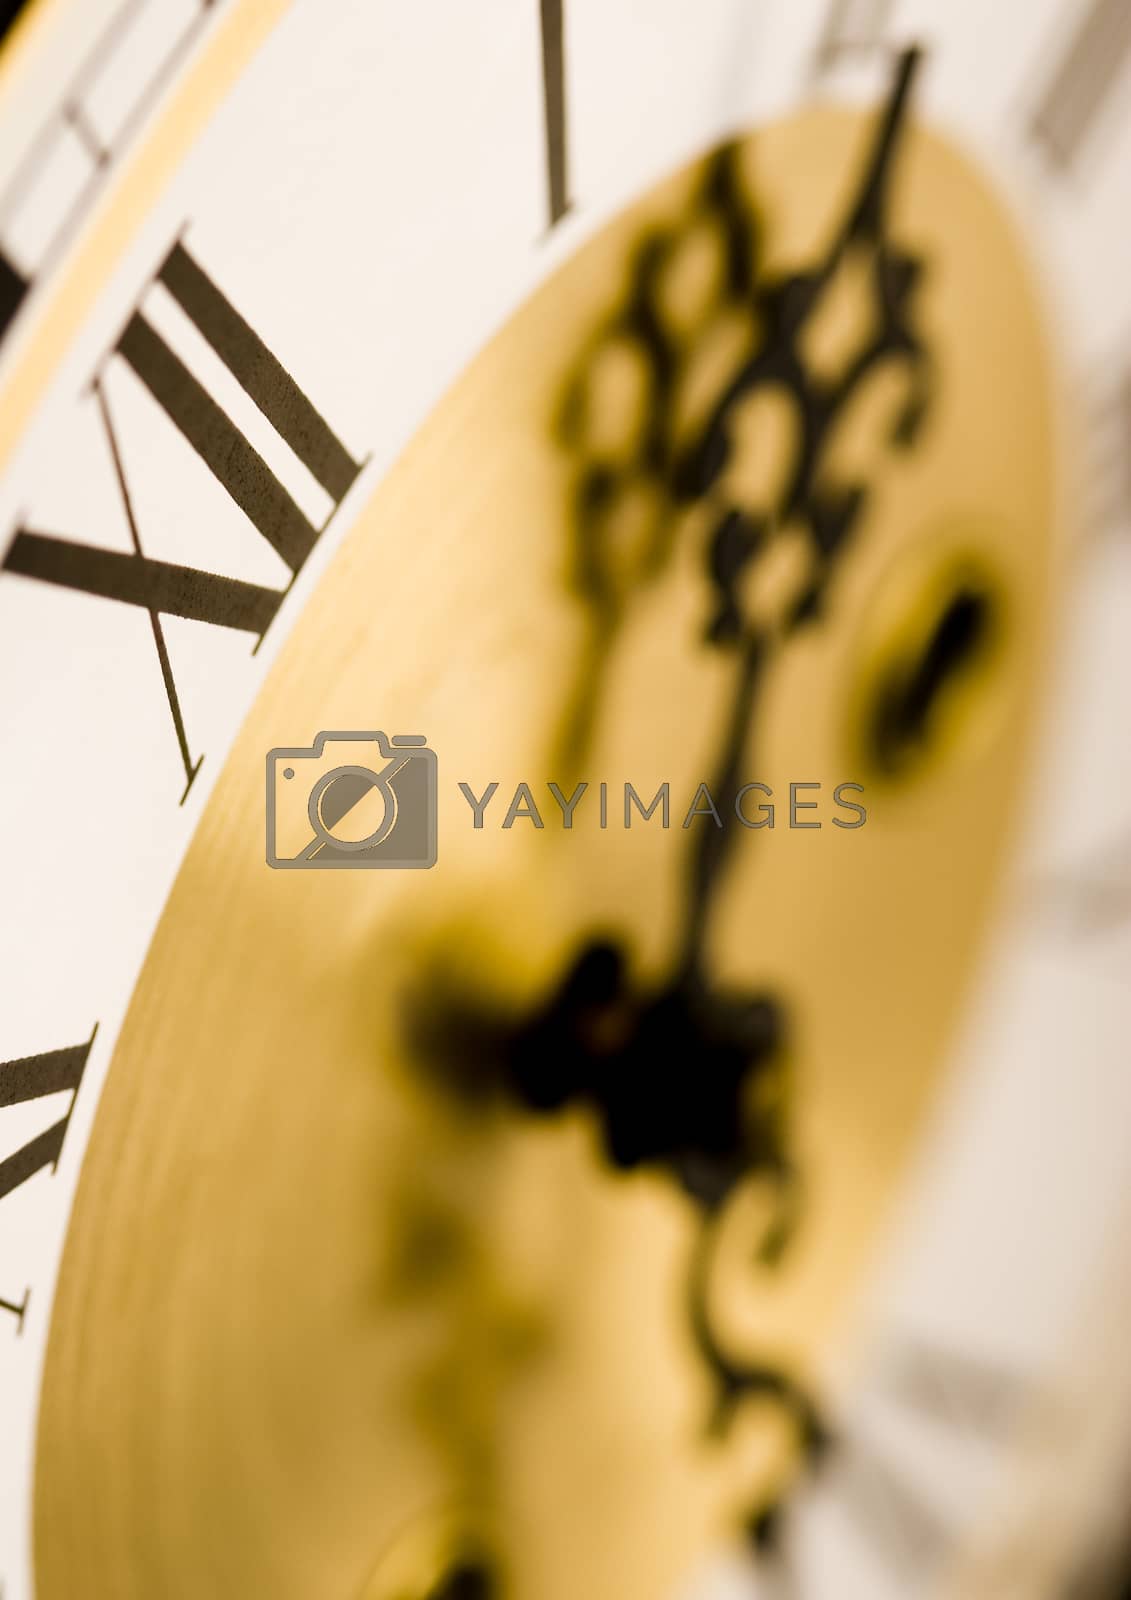 Royalty free image of Analog clock, saturated bright tone concept by JanPietruszka